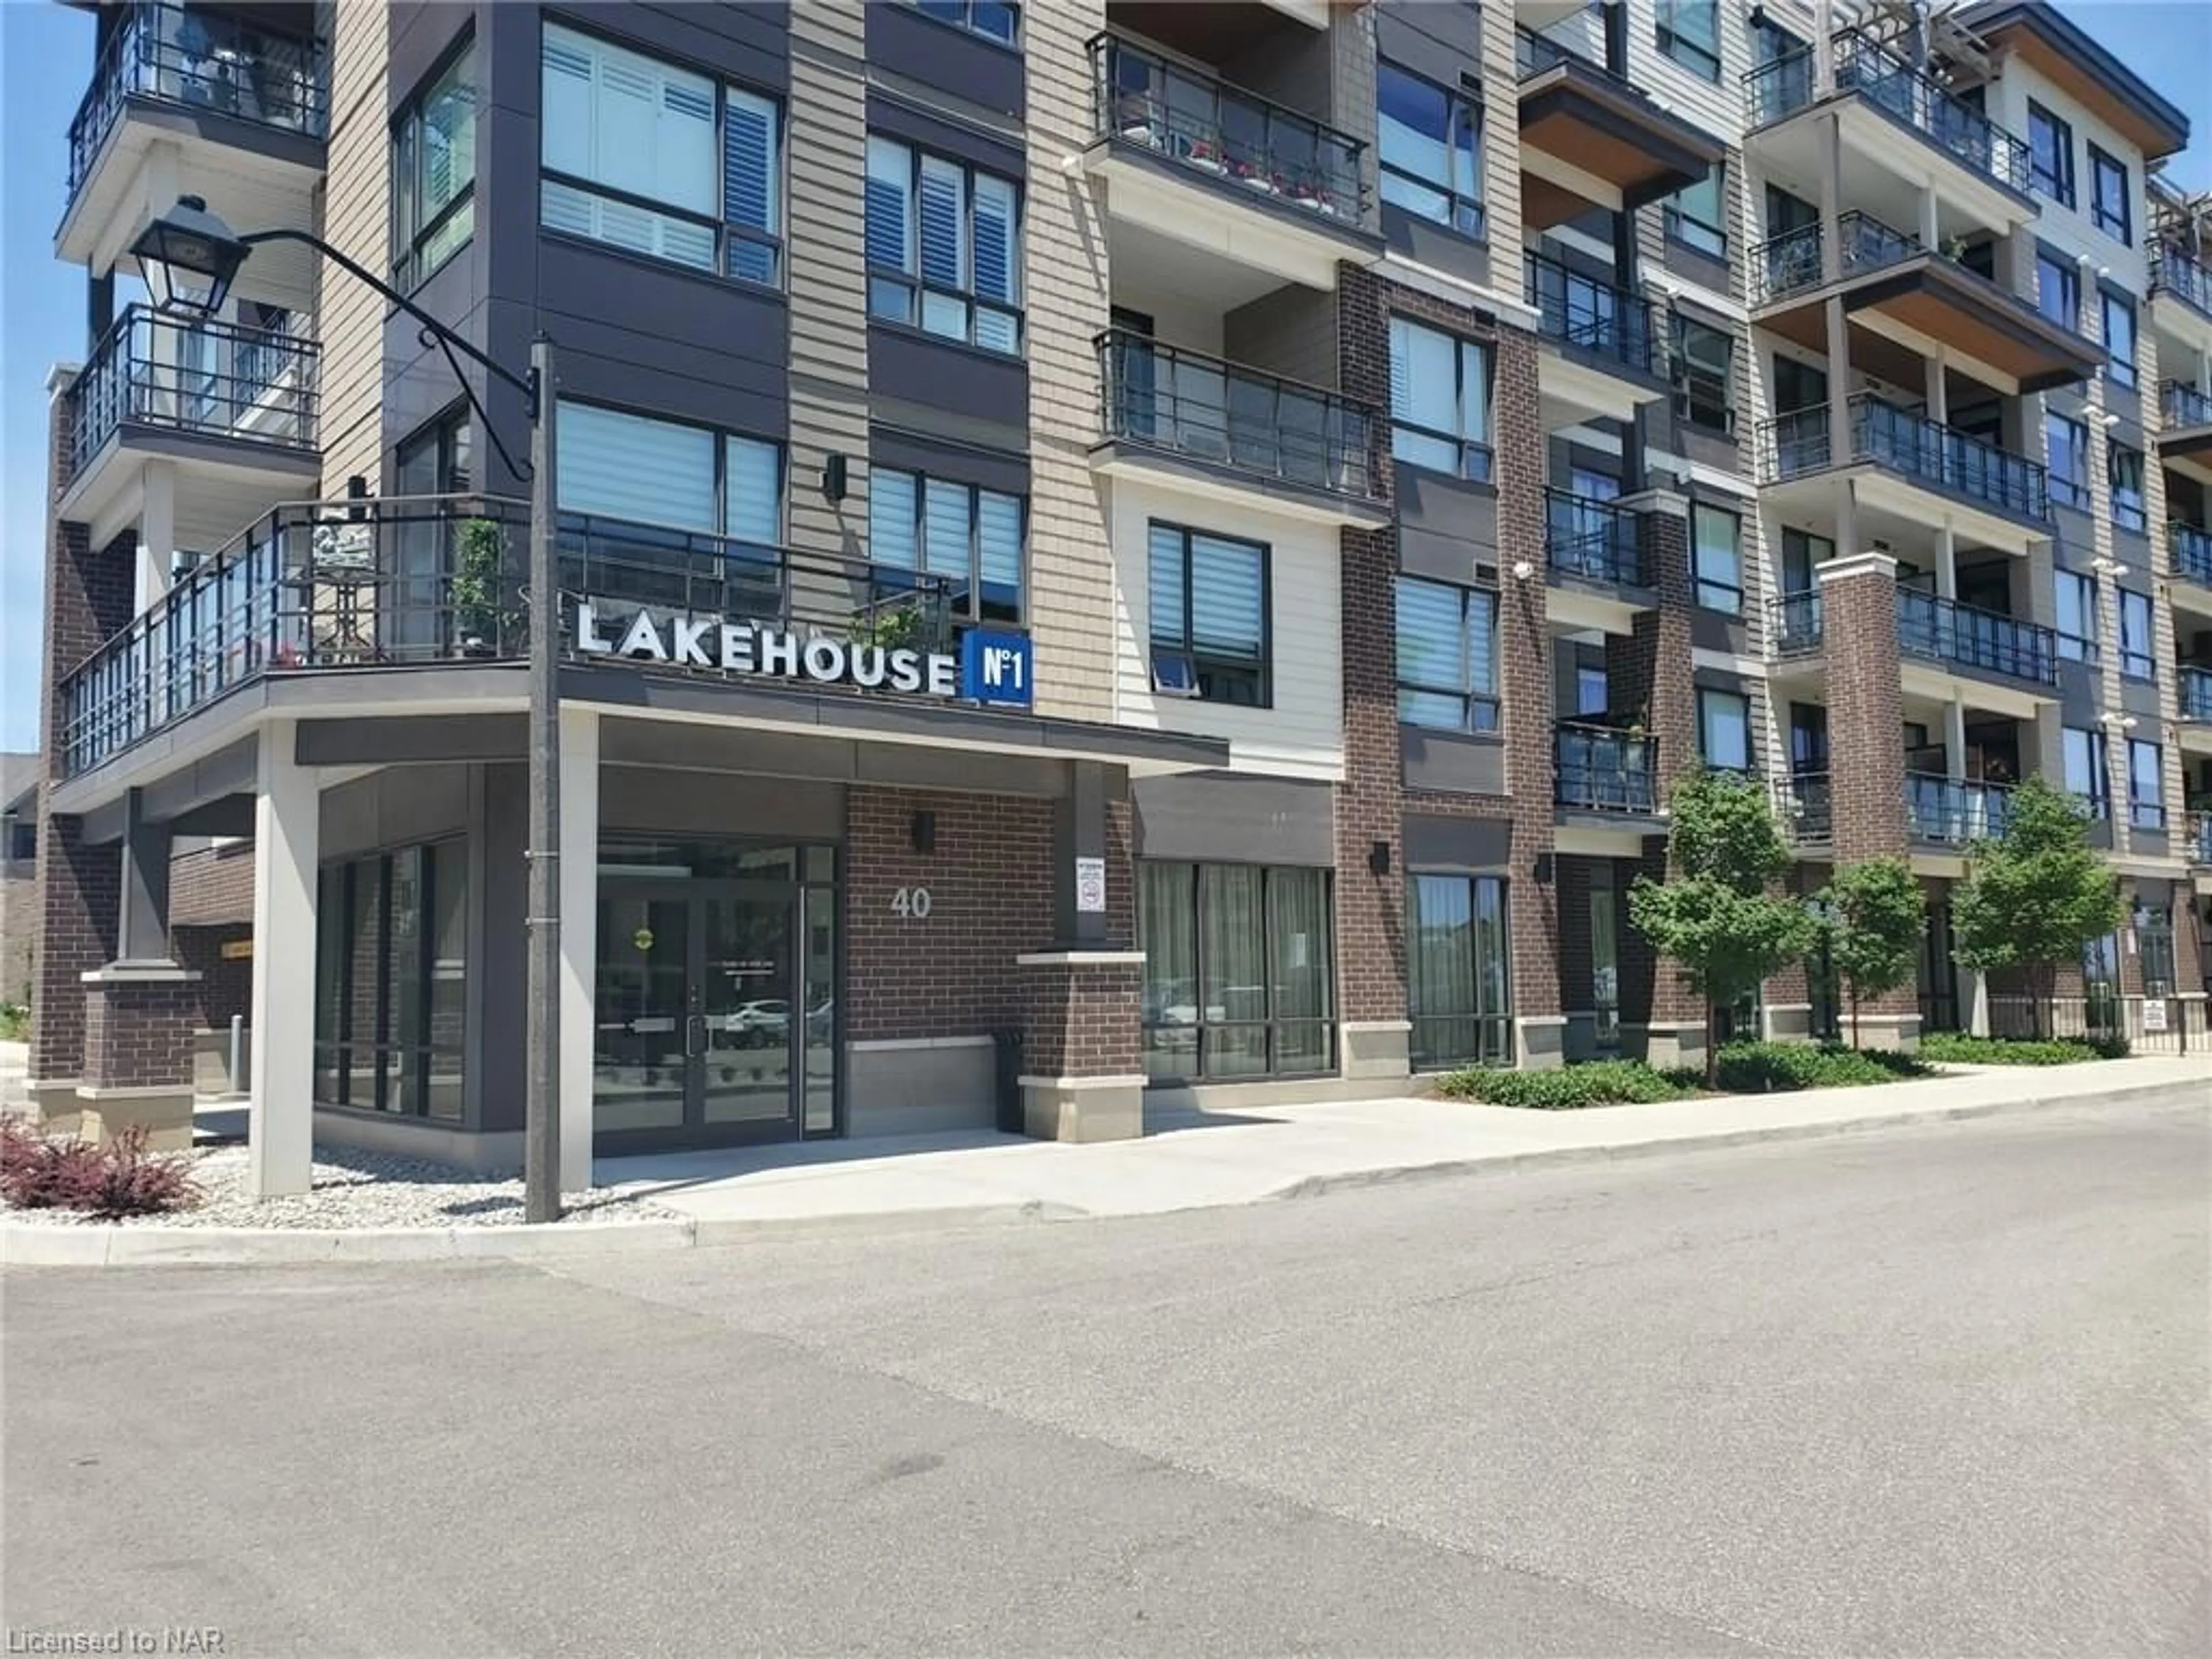 Lakeview for 40 Esplanade Lane #204, Grimsby Ontario L3M 0G9